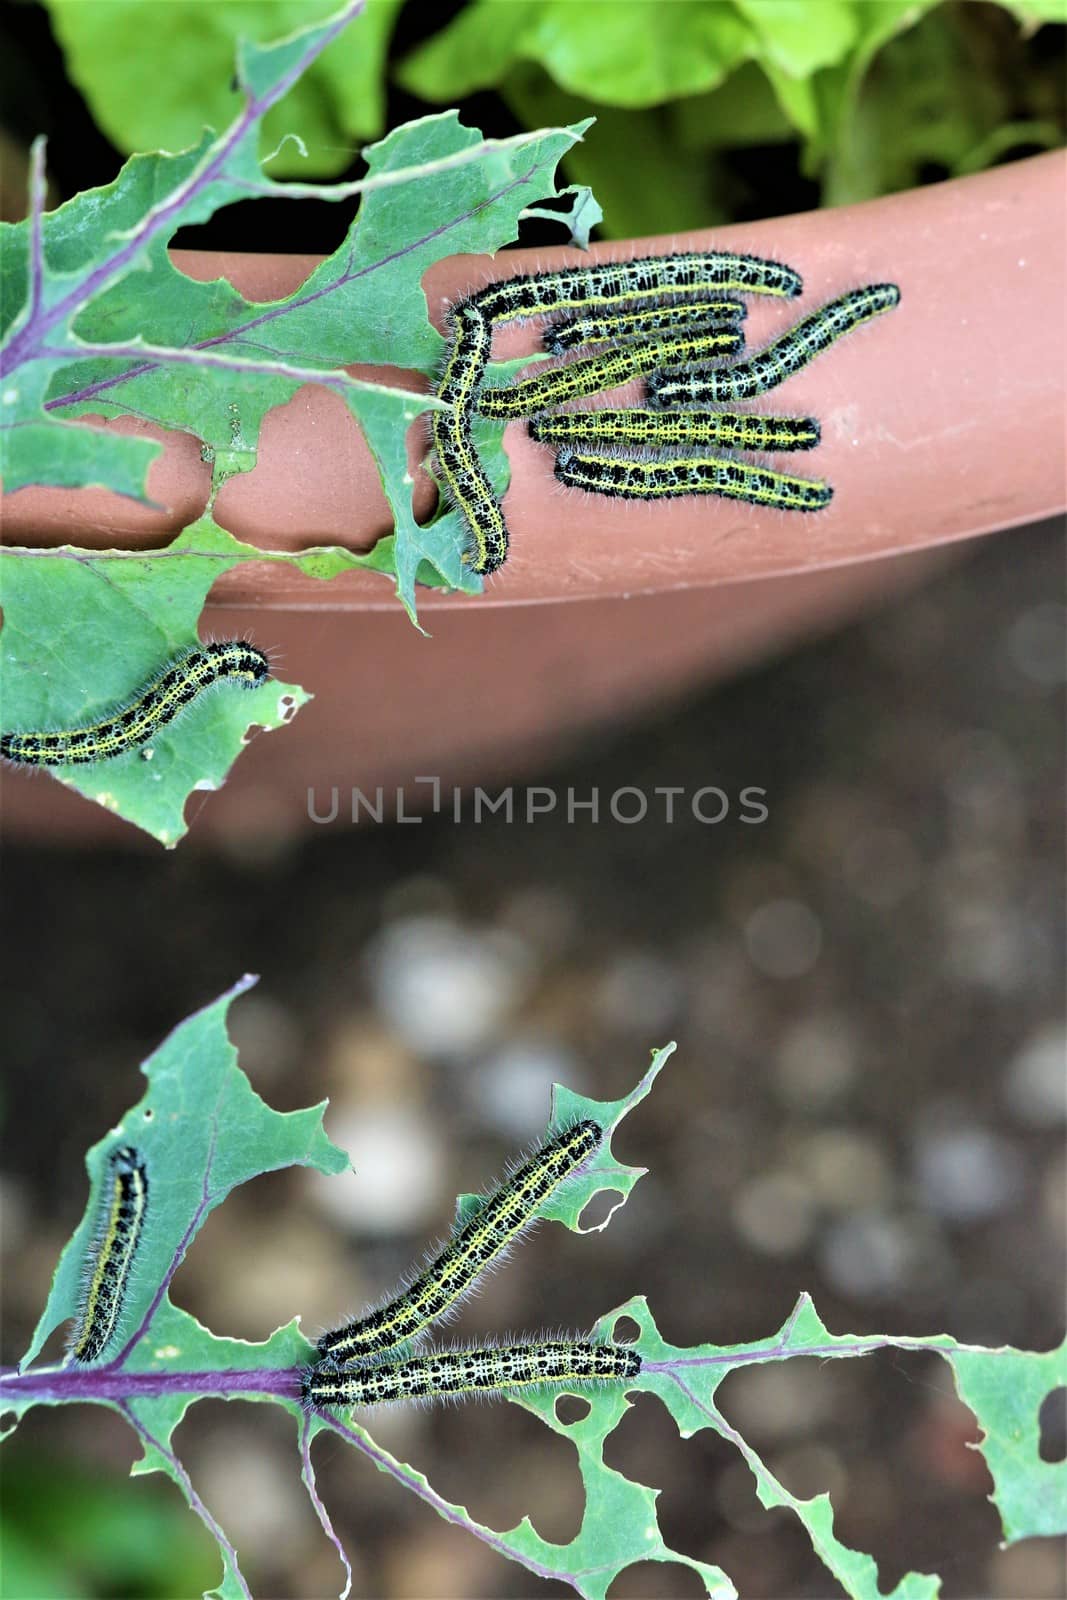 Cabbage caterpillars on a green eaten cabbage leaf and some more on the edge of a brown flowerpot by Luise123